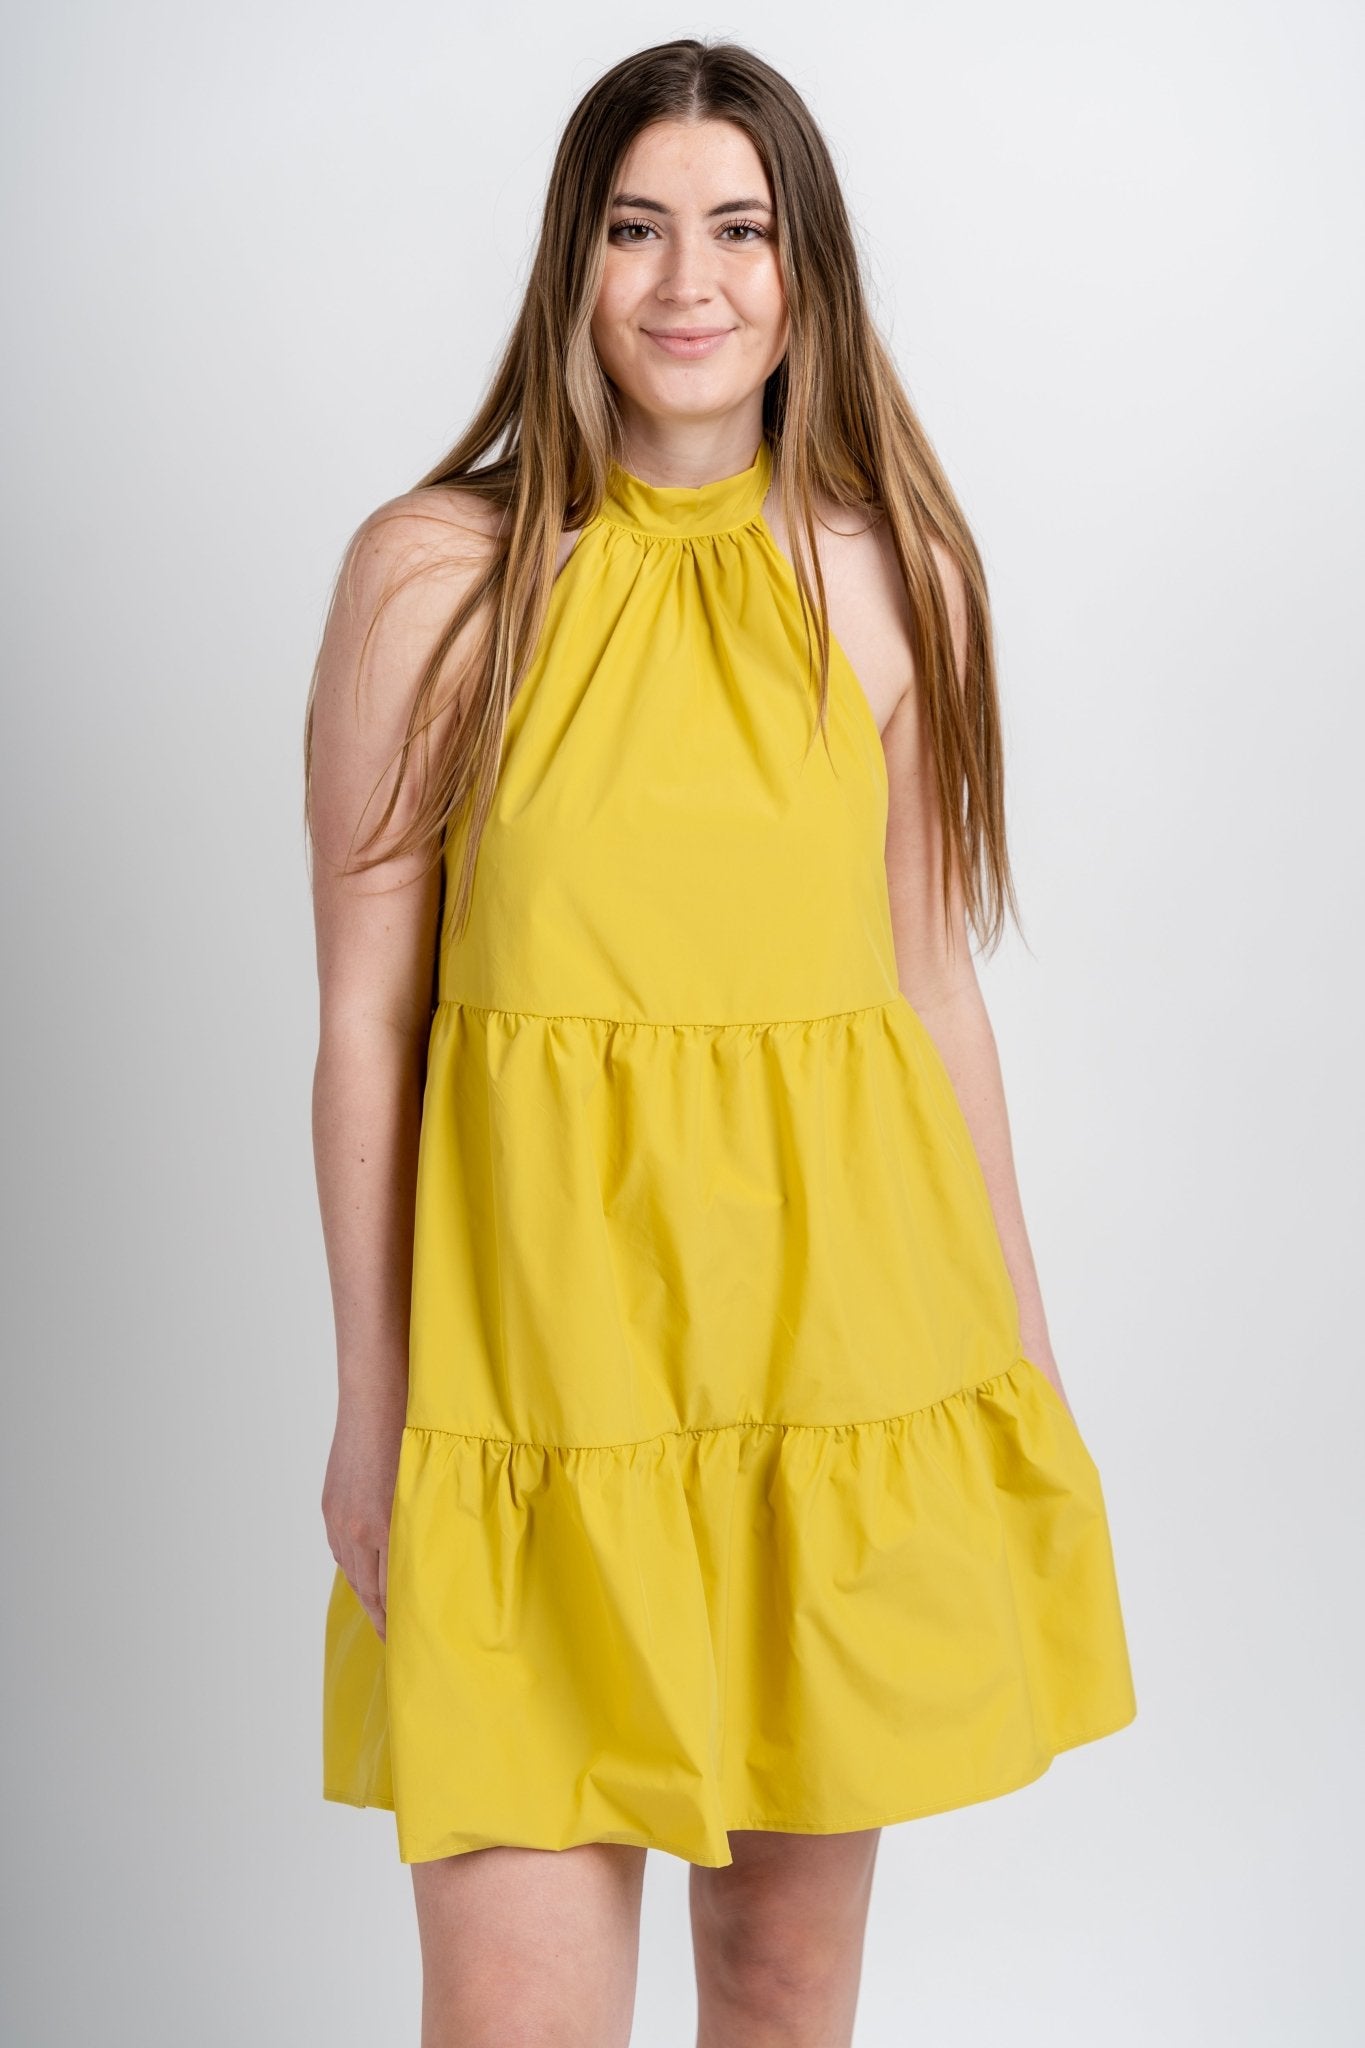 Halter neck tiered dress chartreuse - Affordable Dress - Boutique Dresses at Lush Fashion Lounge Boutique in Oklahoma City